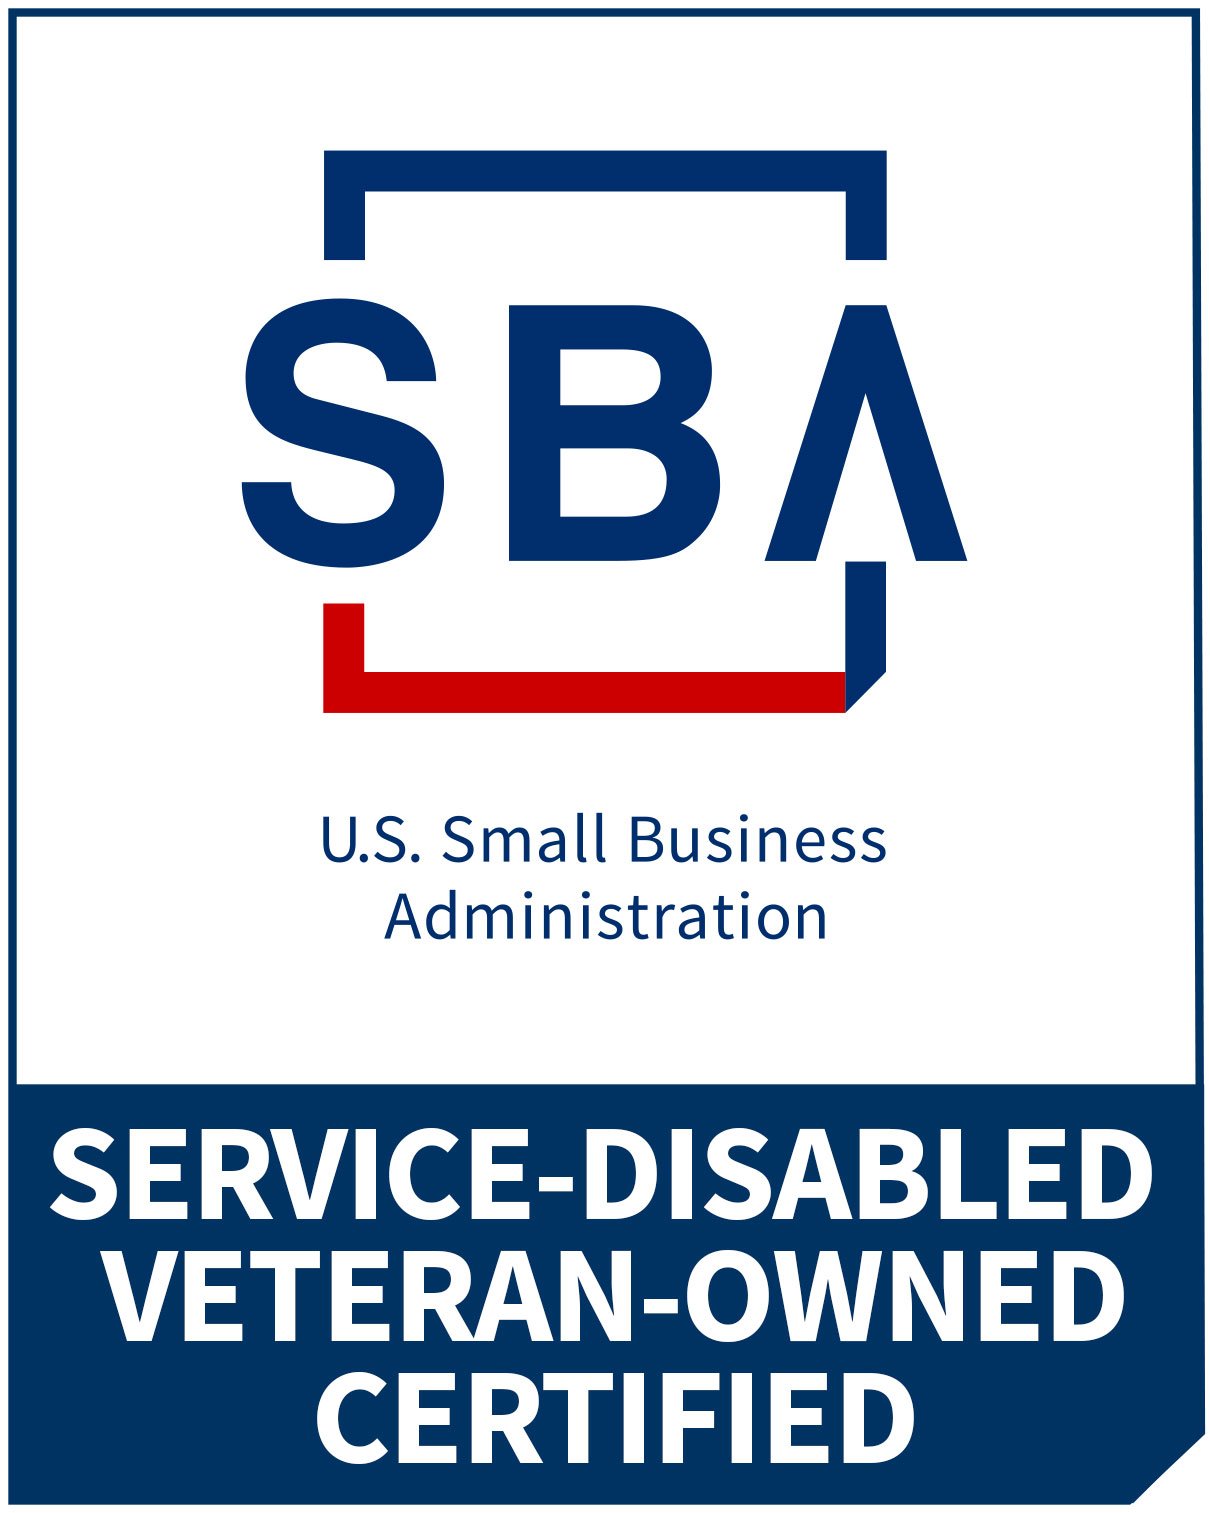 Service-Disabled Veteran-Owned-Certified.jpg